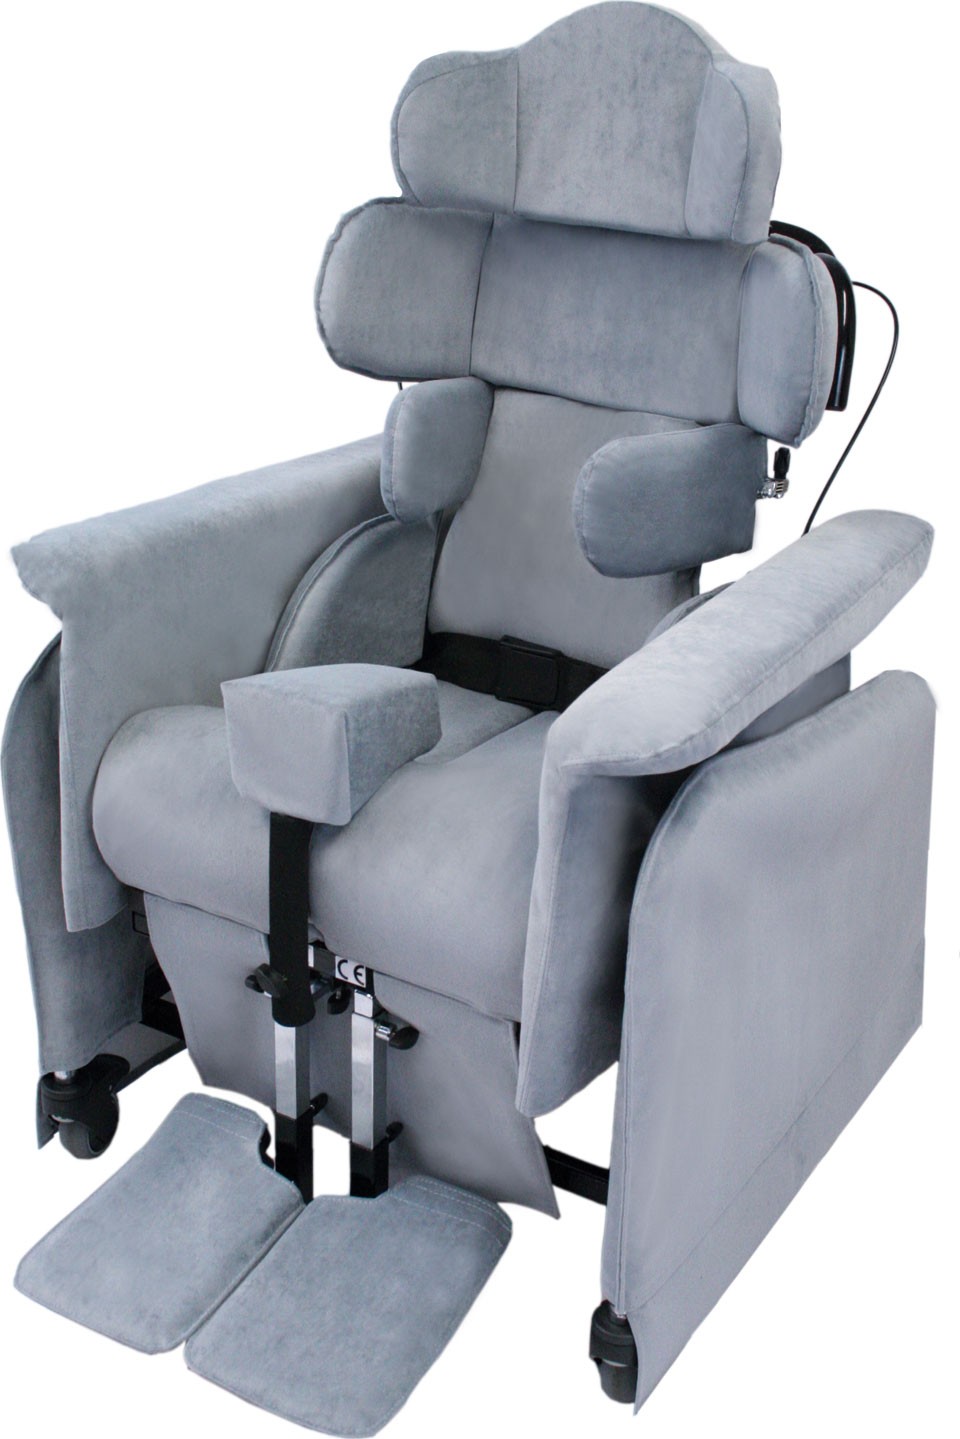 Specialist seating midshires mobility group